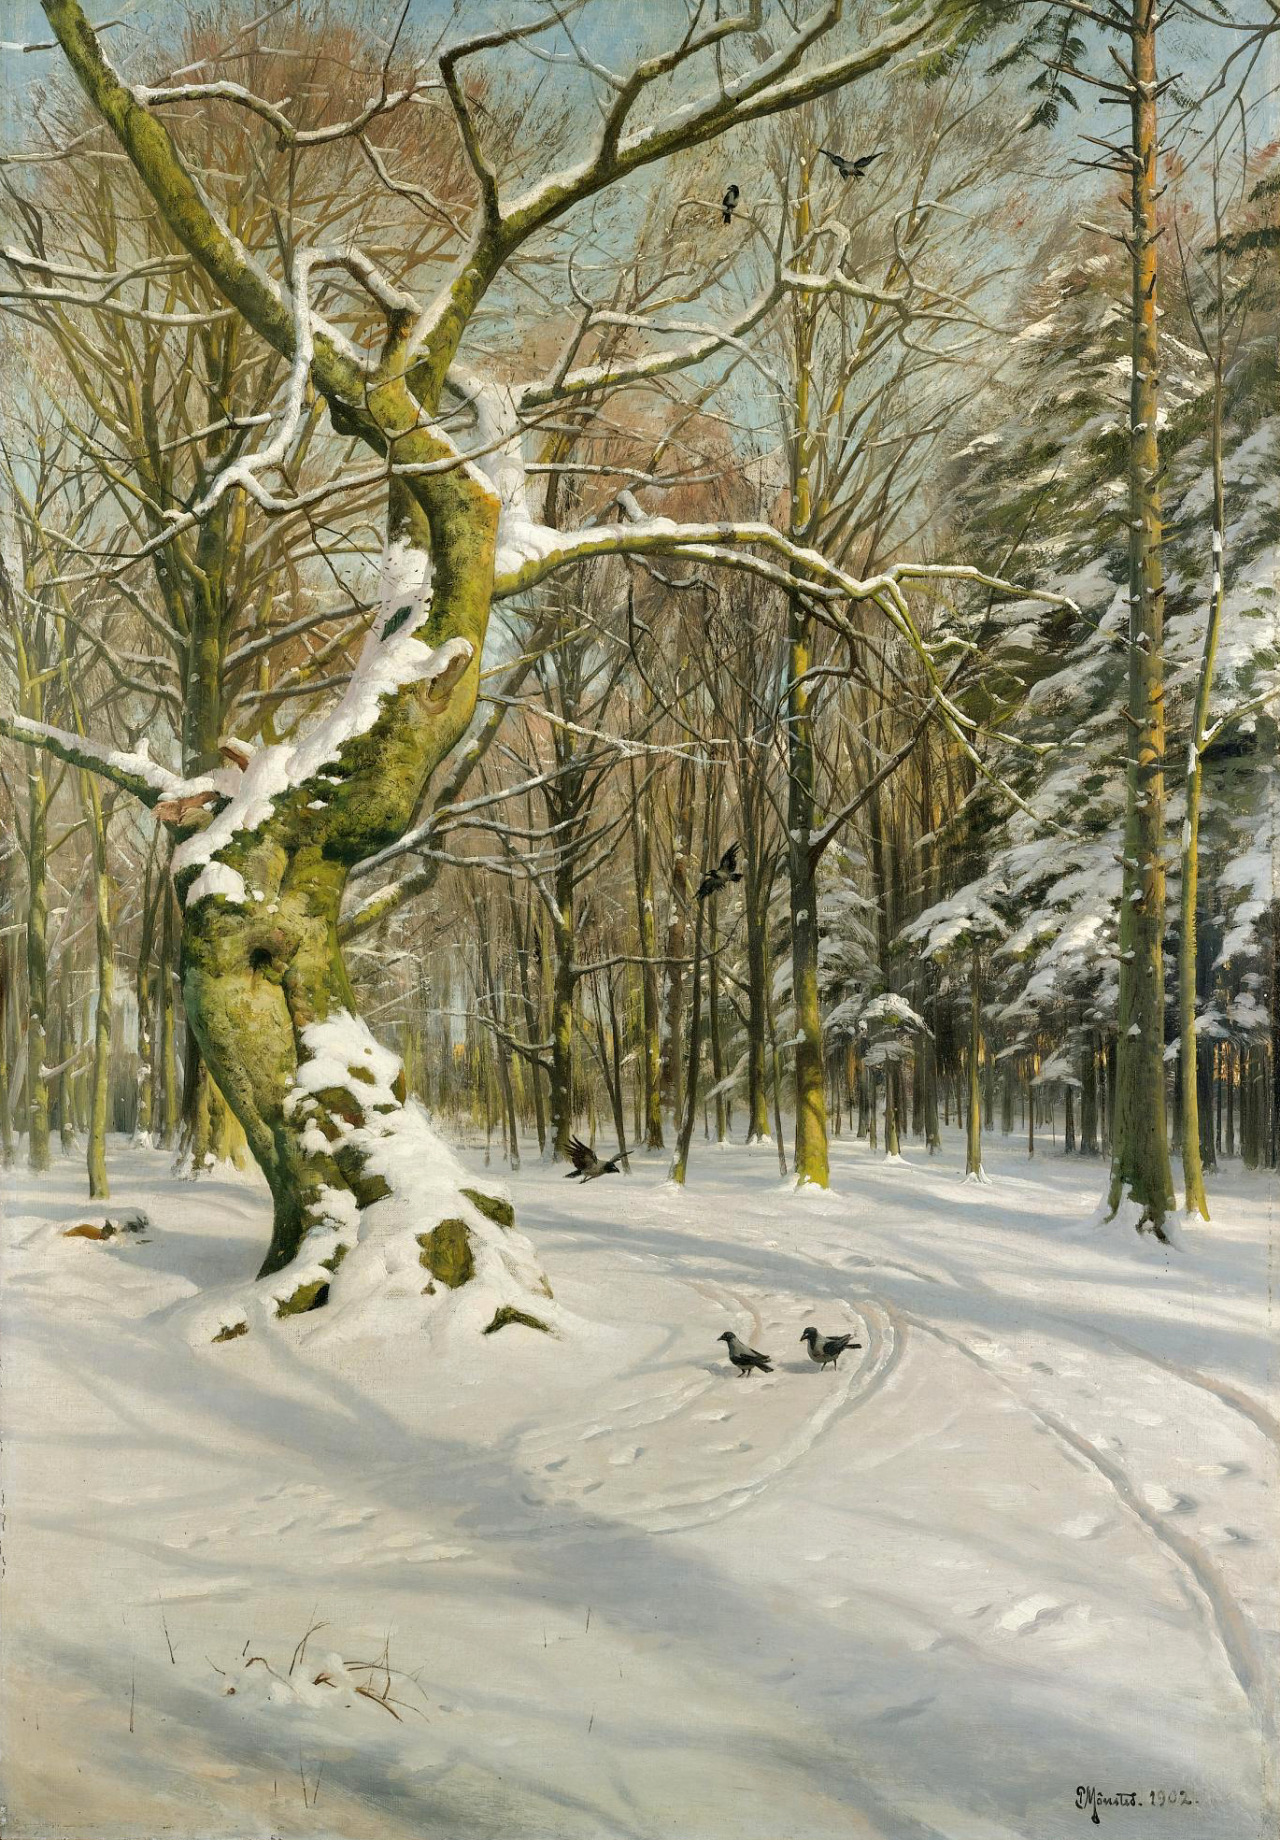 shear-in-spuh-rey-shuhn:
“PEDER MONSTED
Tracks Through The Forest
Oil on Canvas
47″ x 33″
”